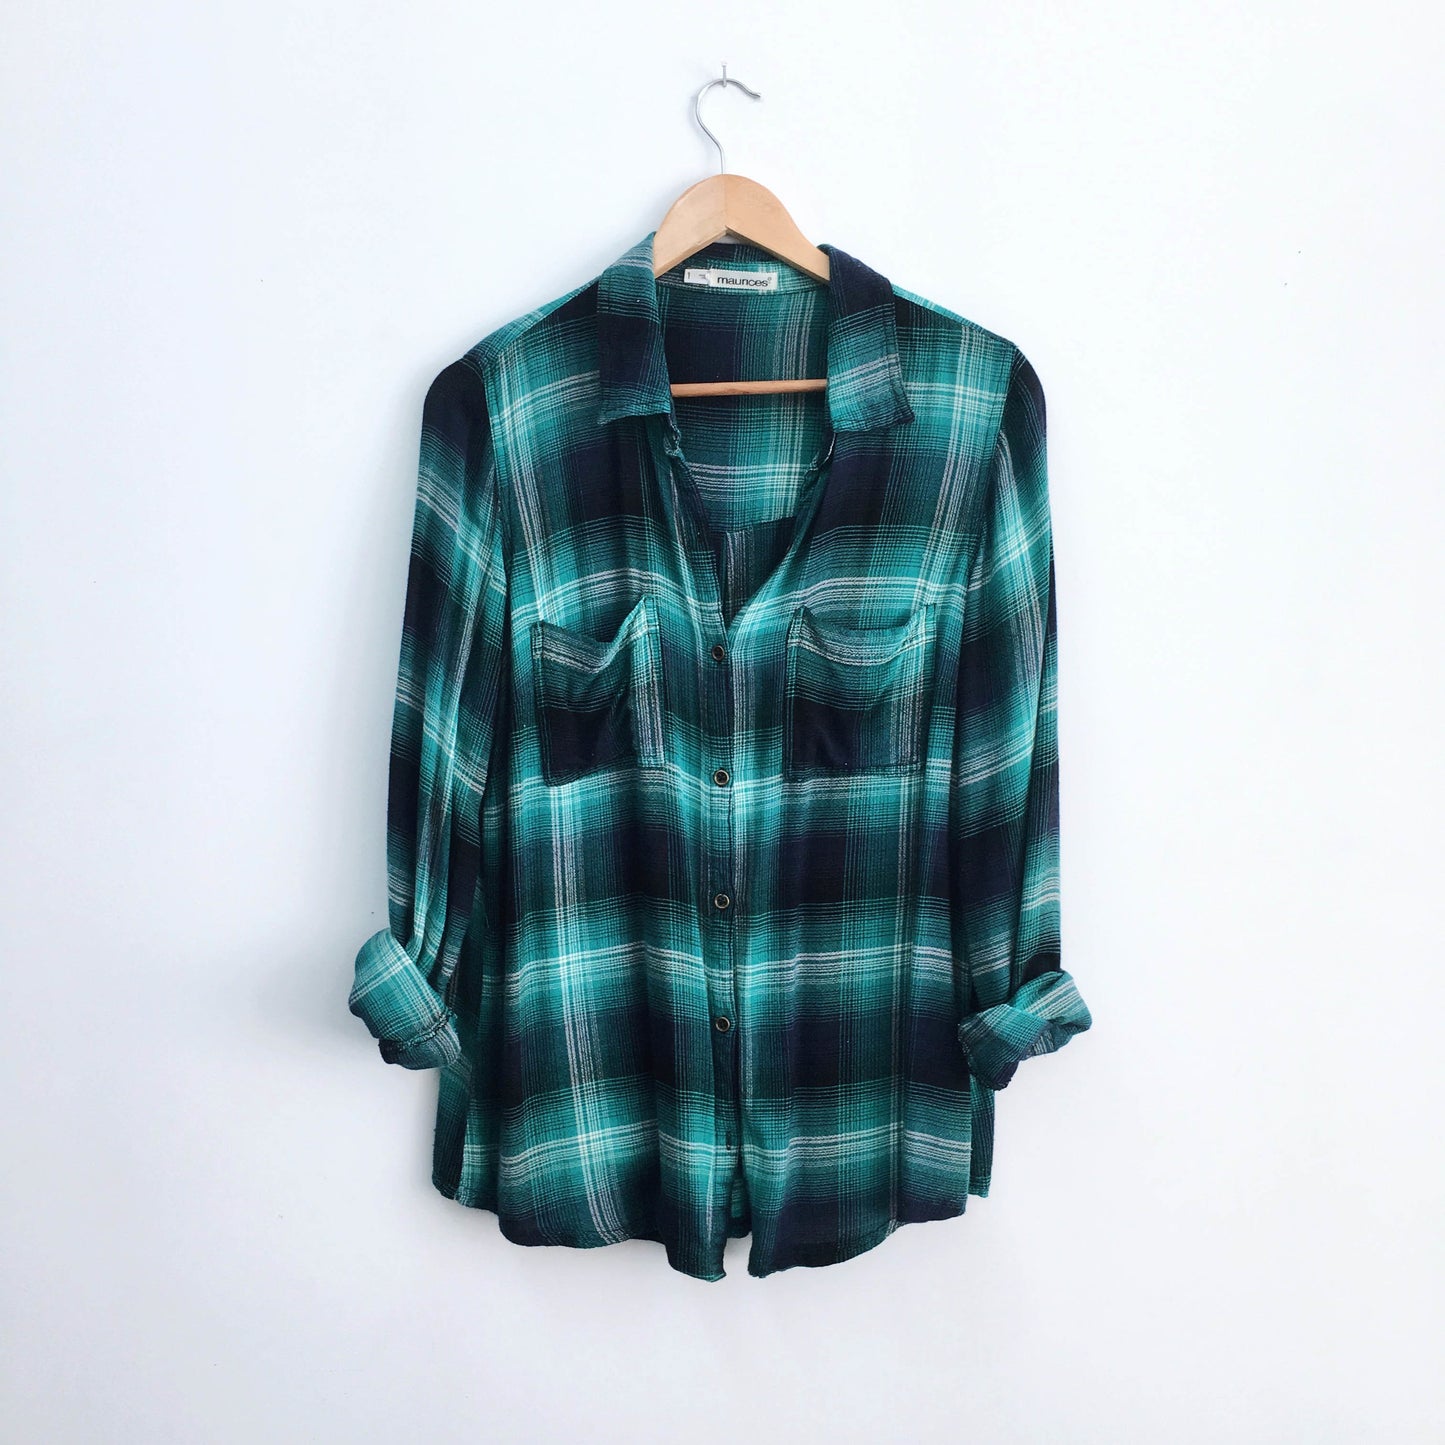 Maurices plaid shirt - size 1